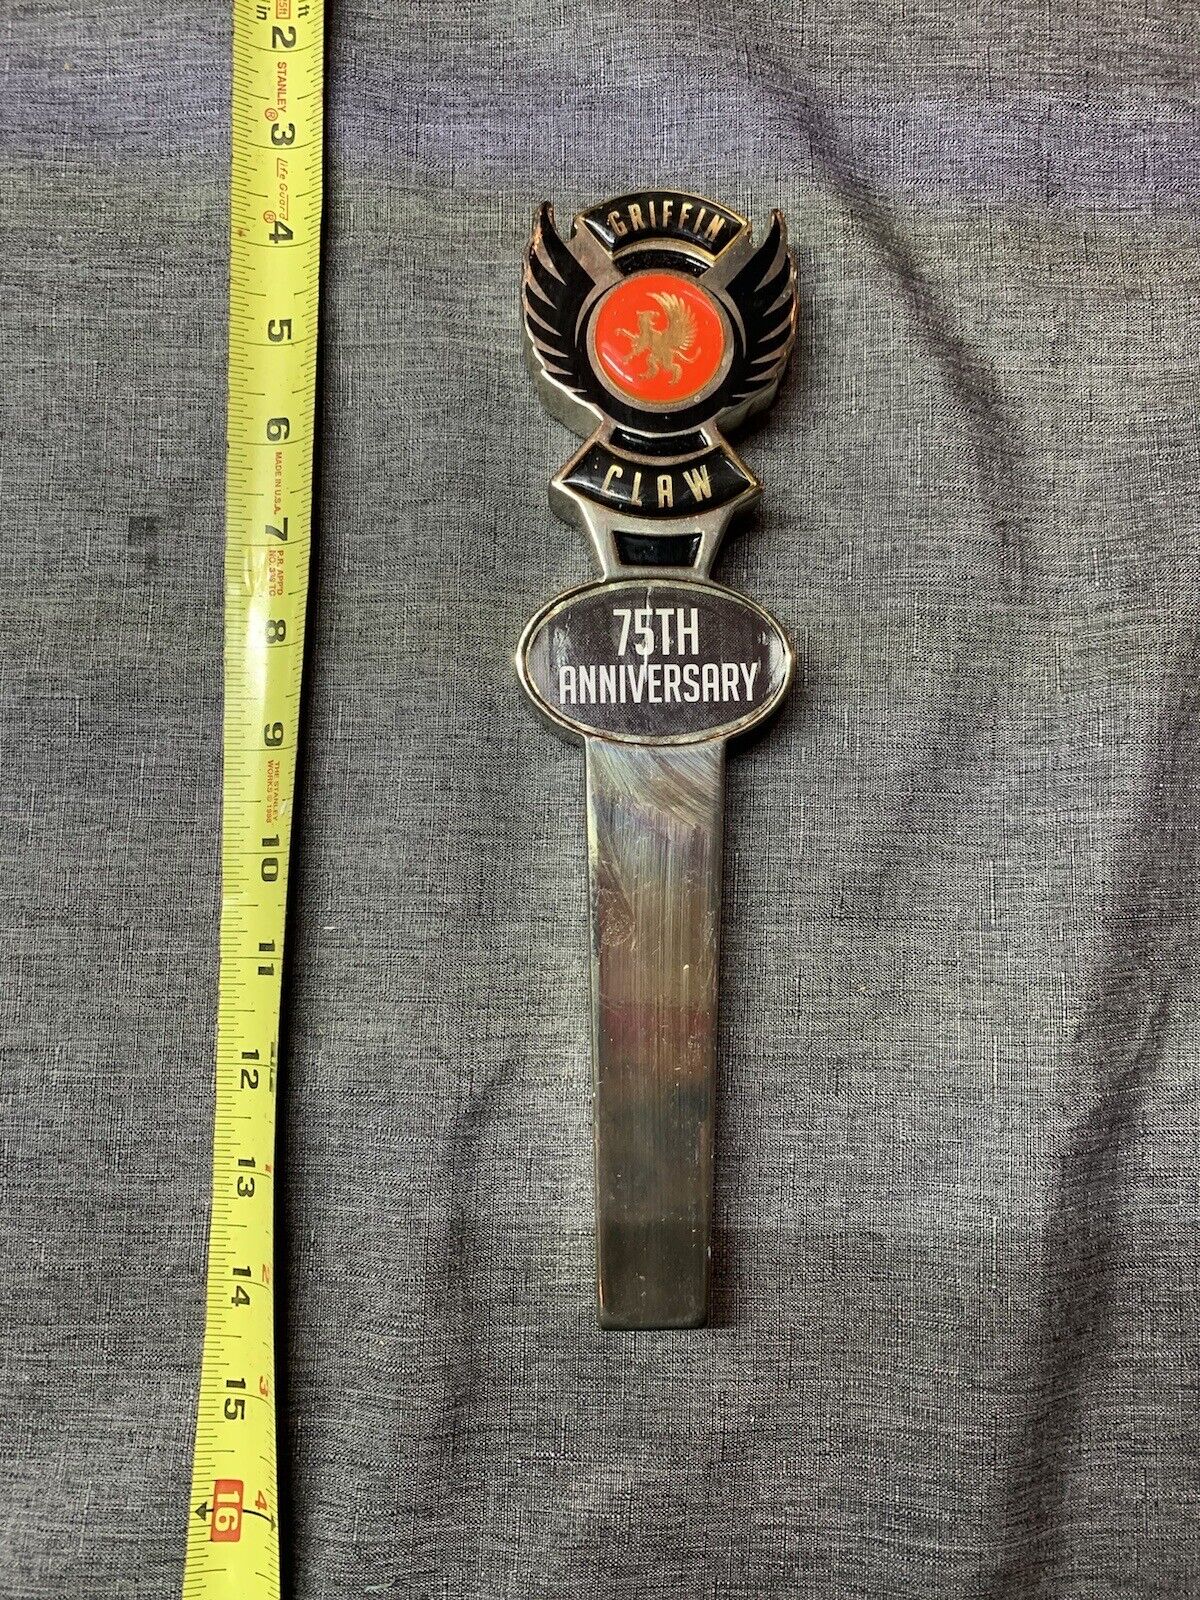 Griffin Claw 75th Anniversary Beer Tap Handle 